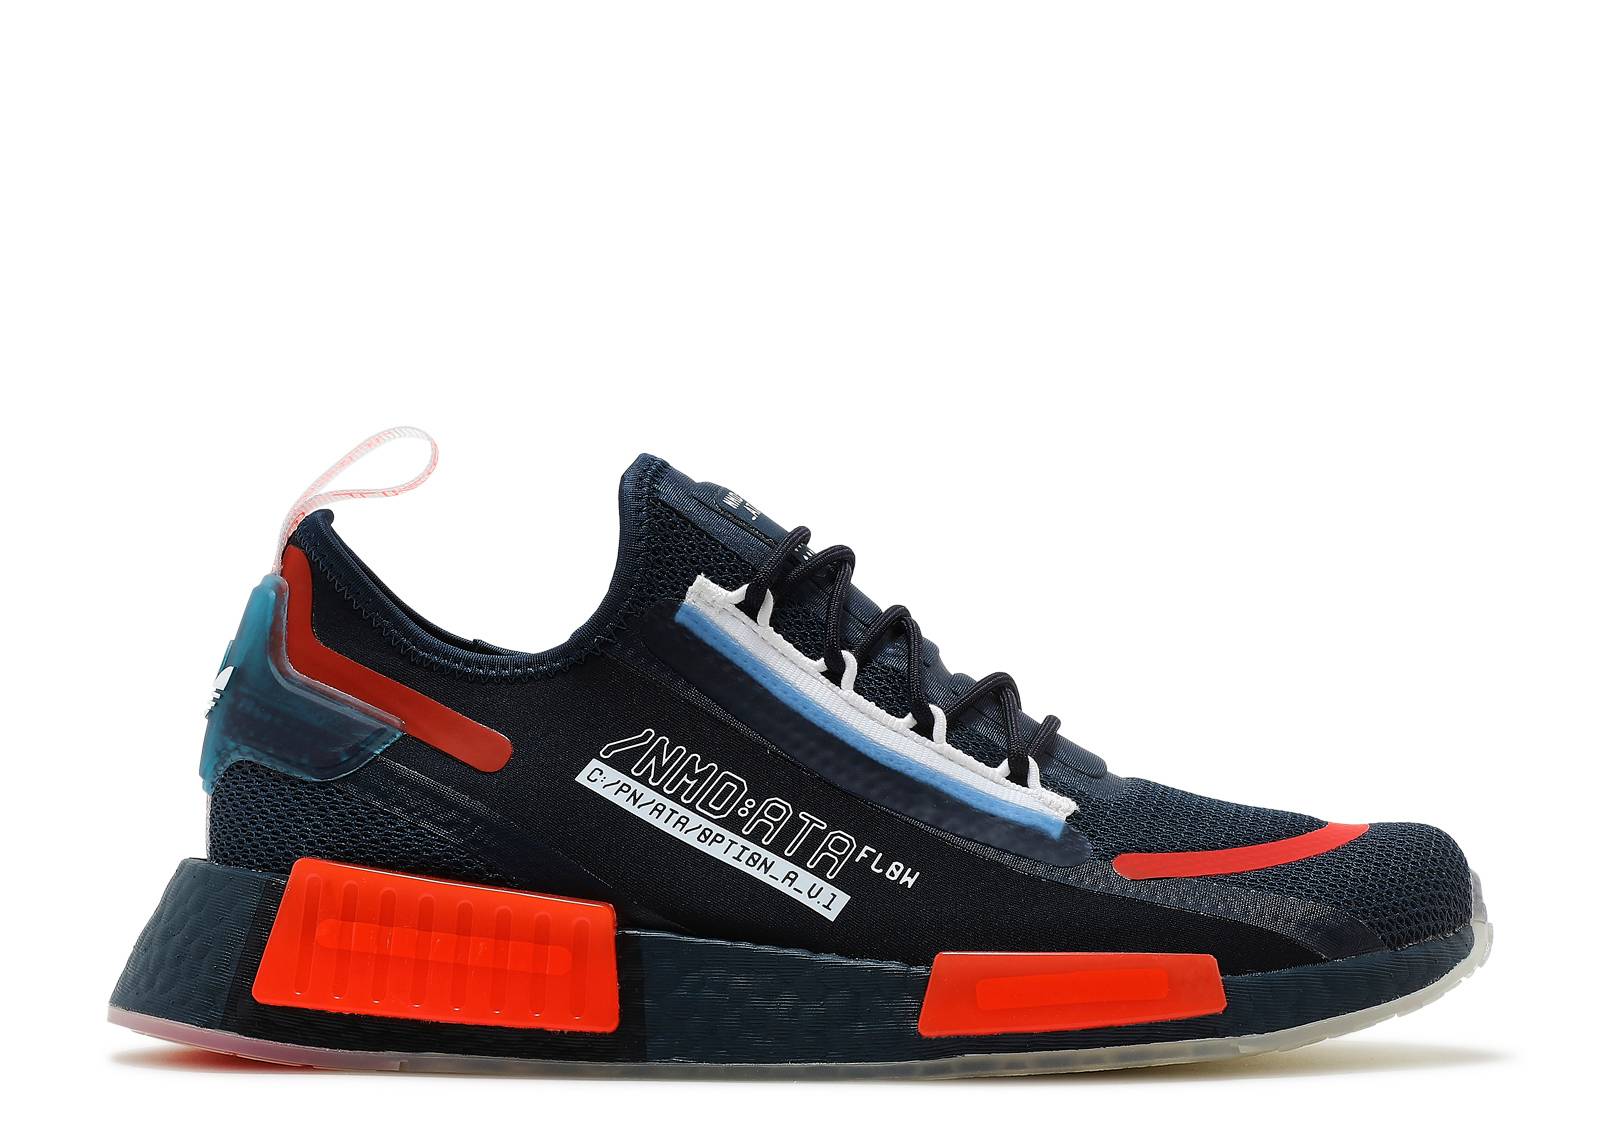 NMD_R1 Spectoo 'Crew Navy Solar Red'